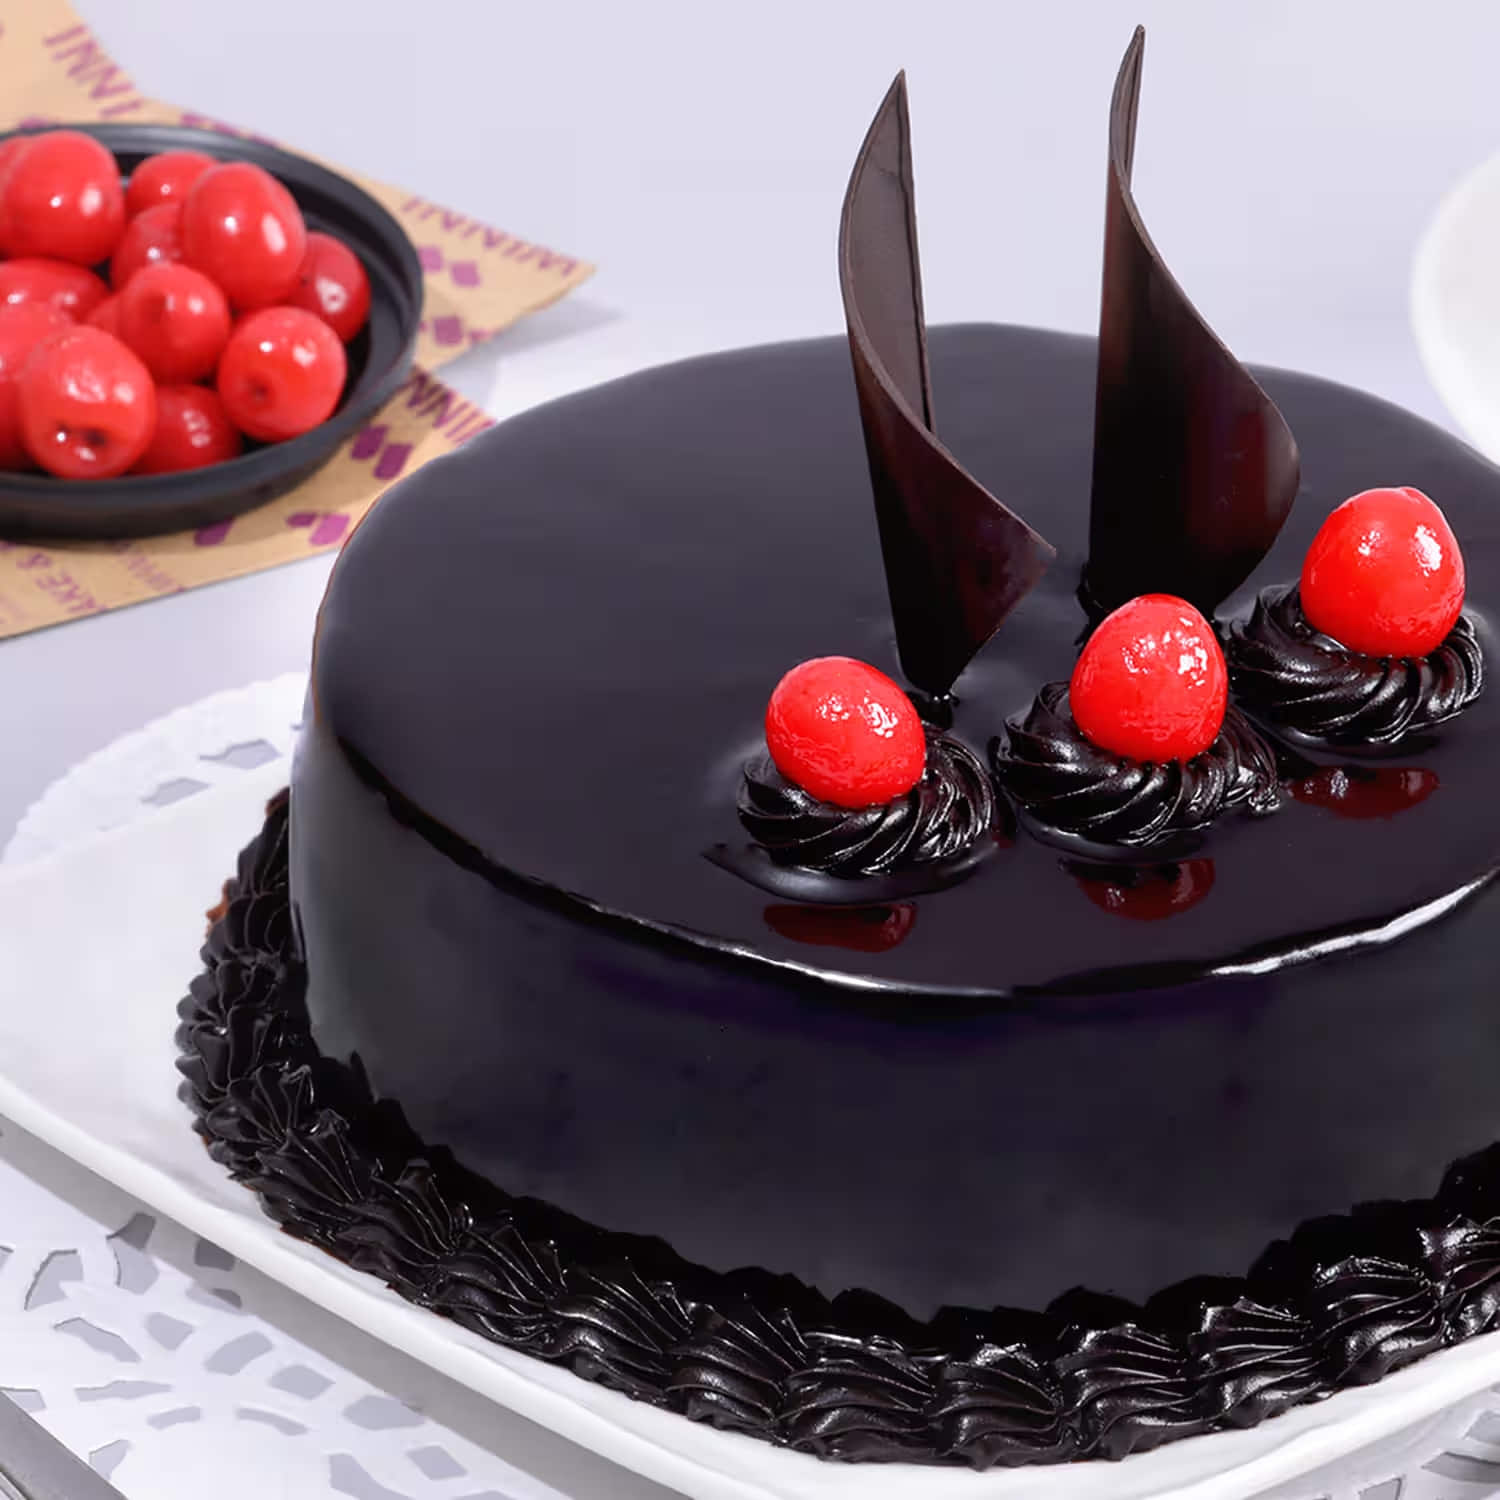 Details more than 84 100 rupees ka cake latest - in.daotaonec